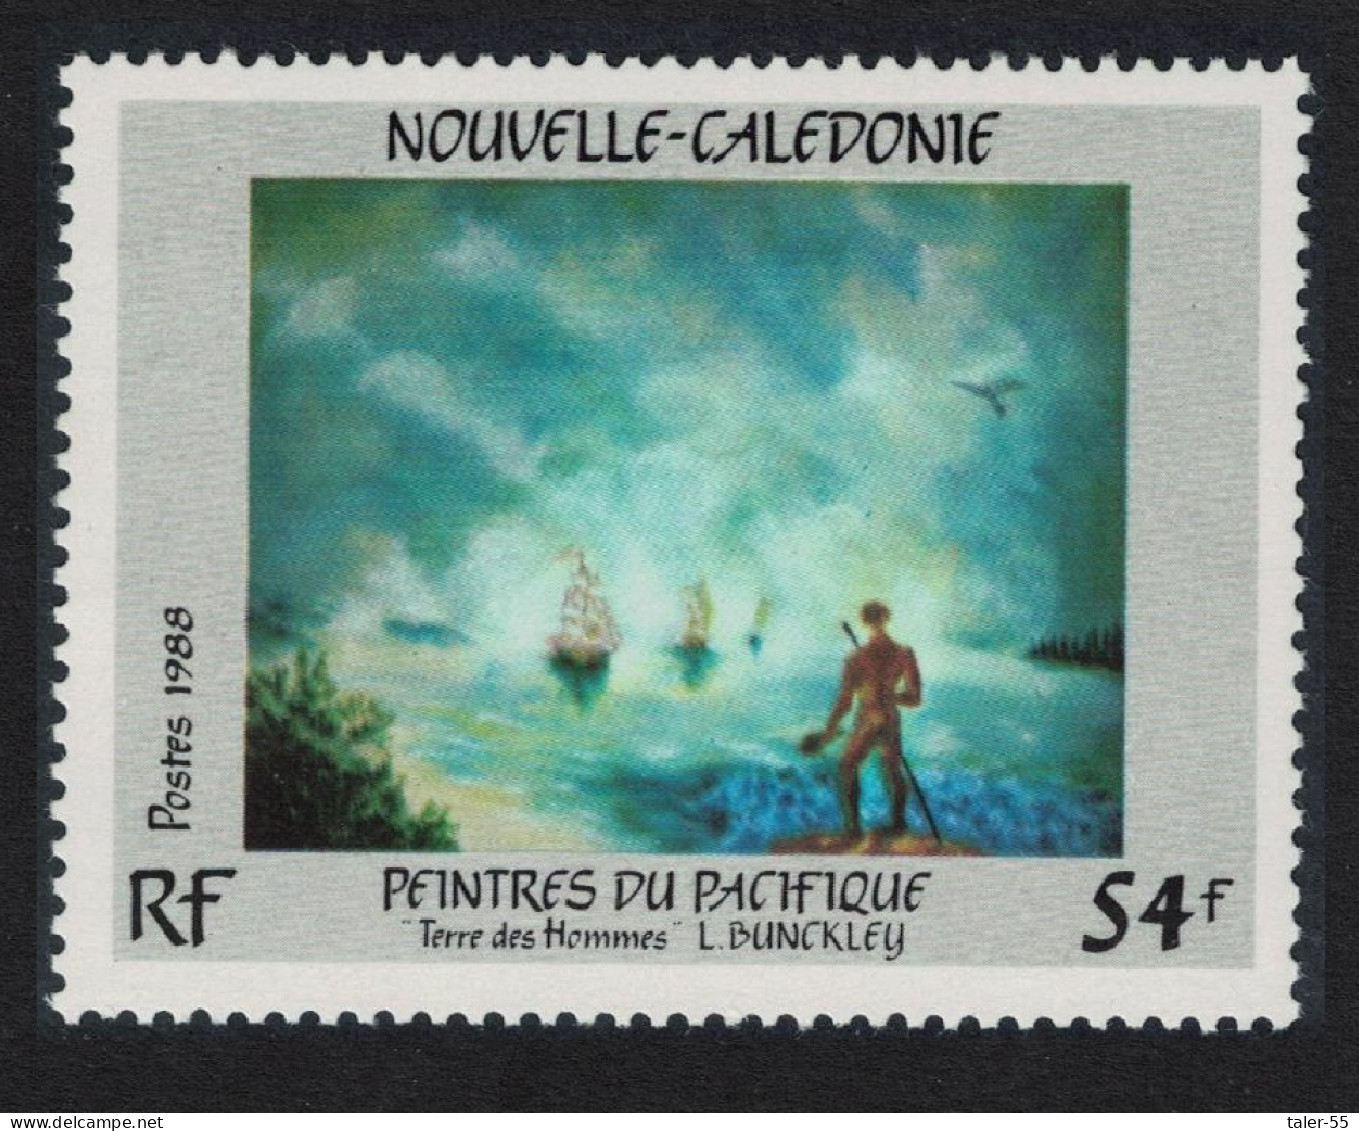 New Caledonia 'Terre Des Hommes' Painting By L. Bunckley 1988 MNH SG#852 - Nuovi